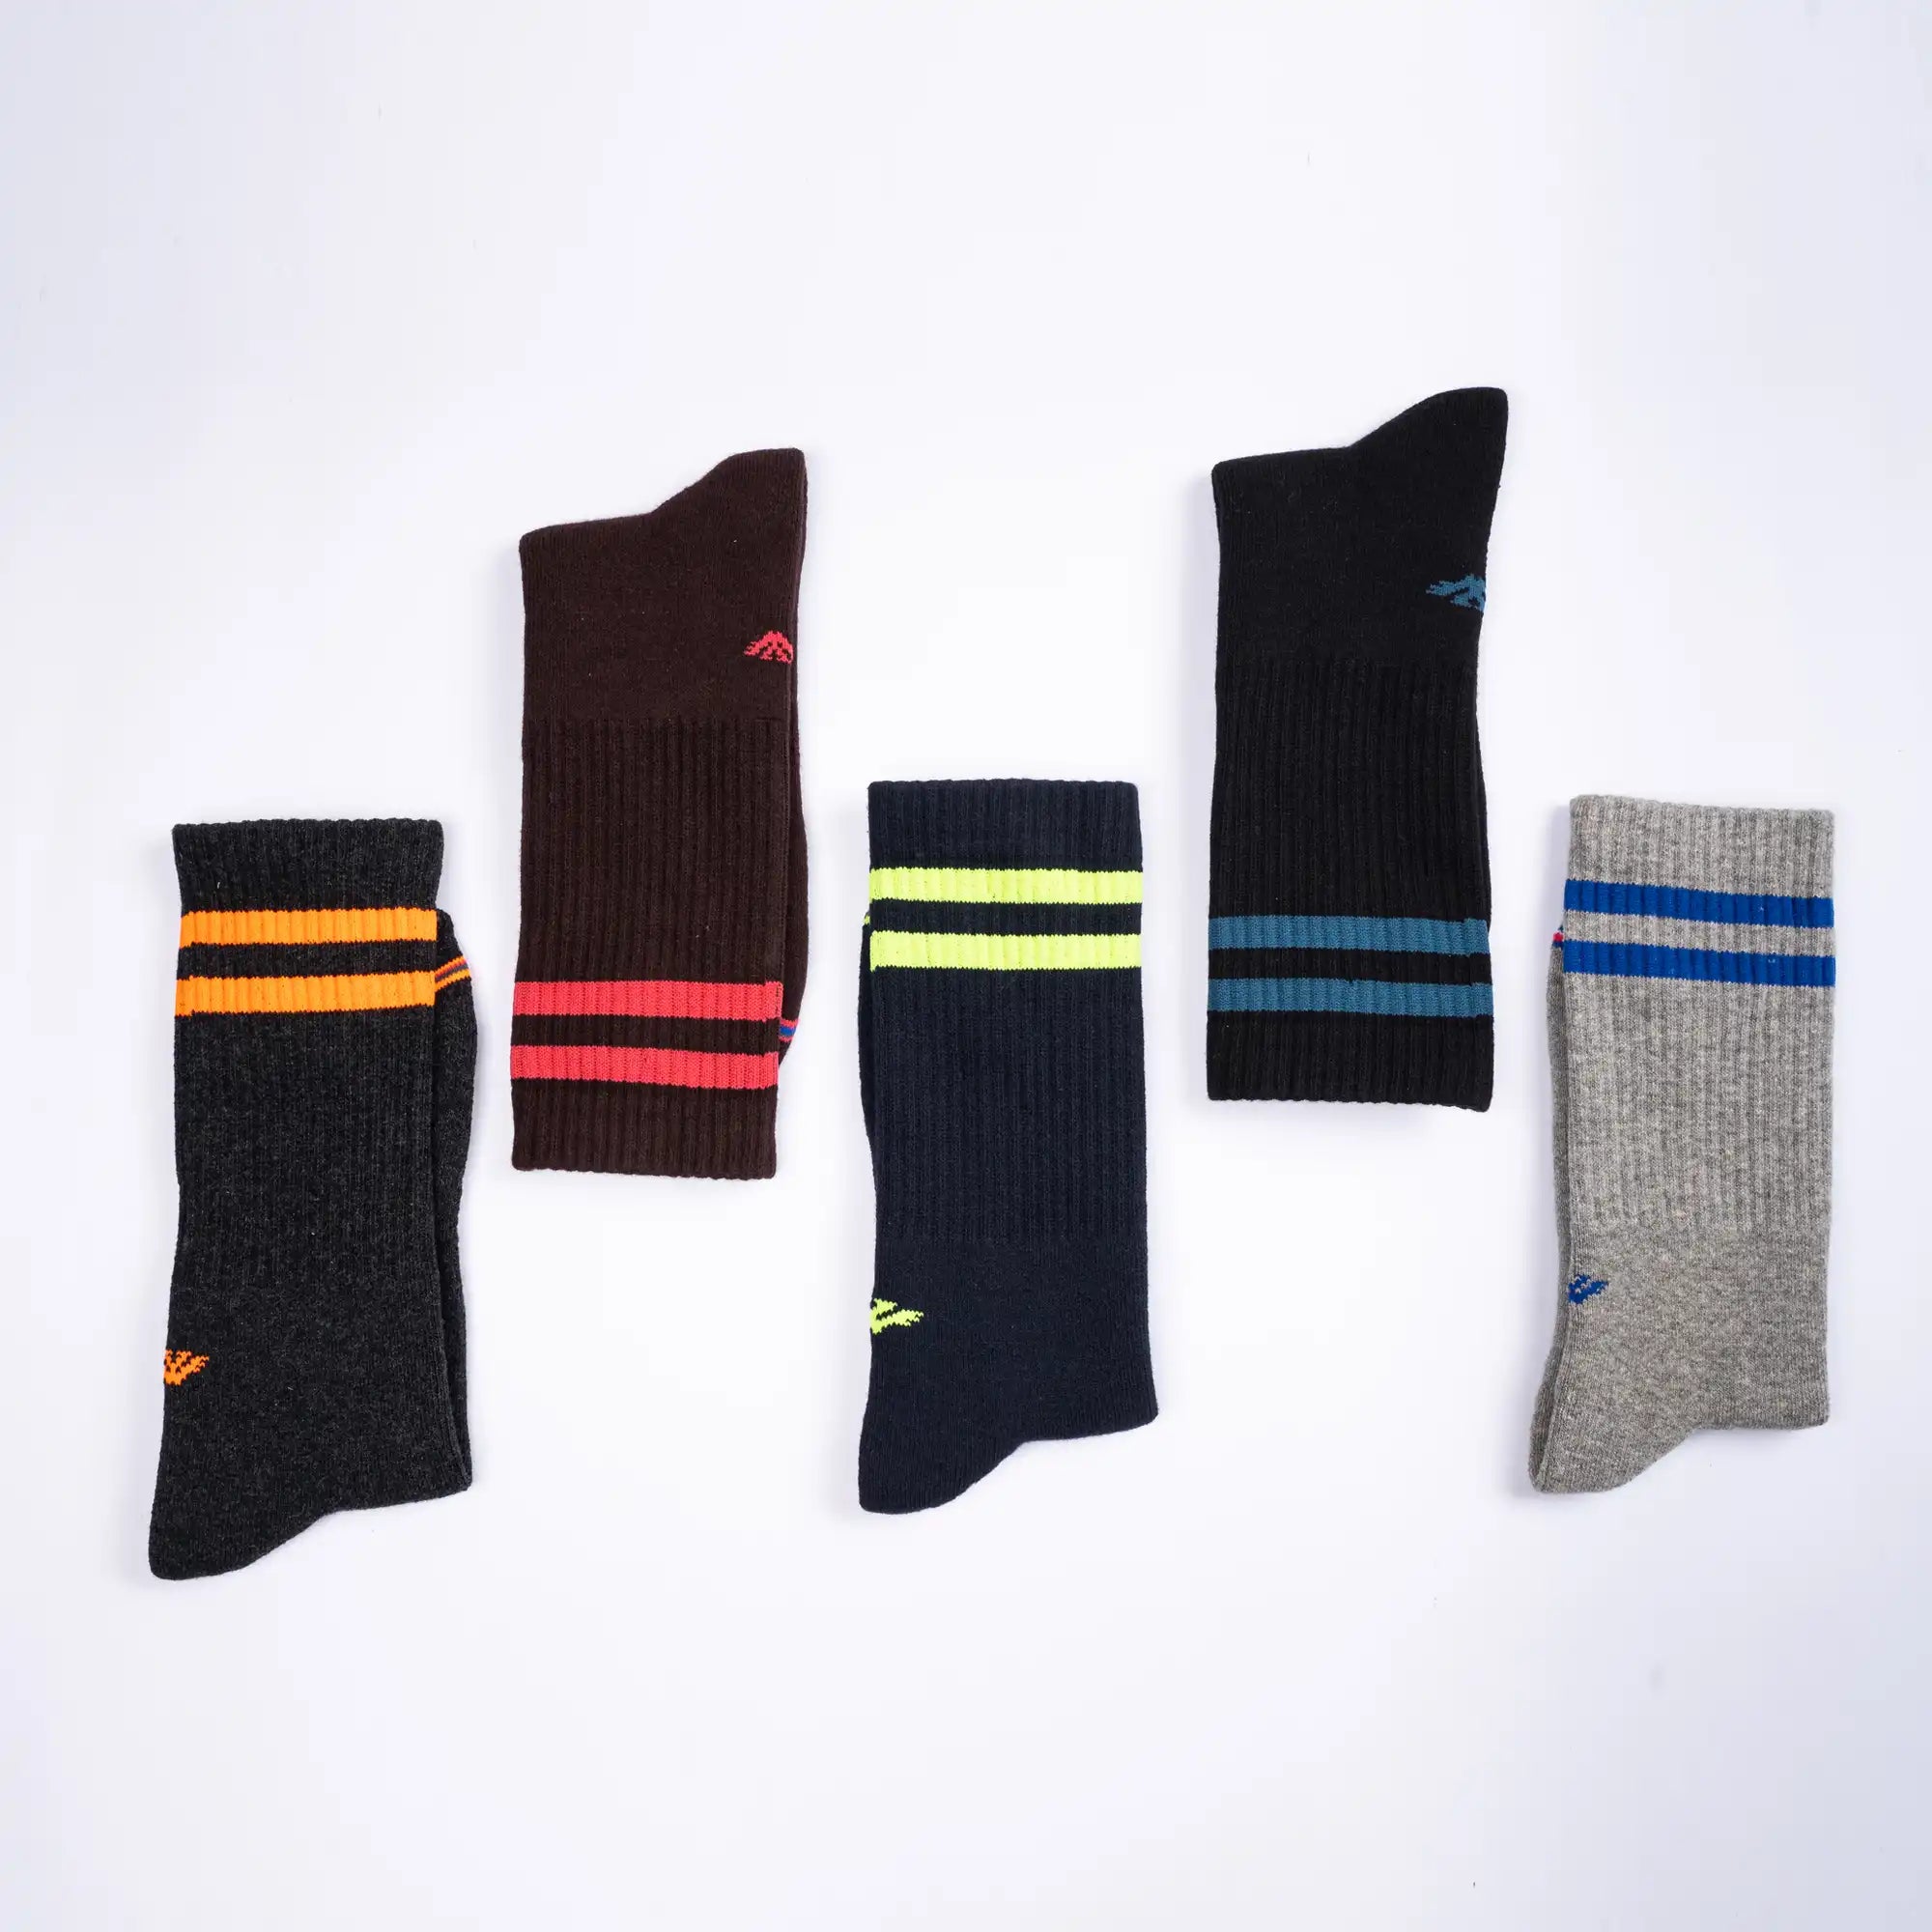 Young Wings Men's Multi Colour Cotton Fabric Design Full Length Socks - Pack of 3, Style no. M1-372